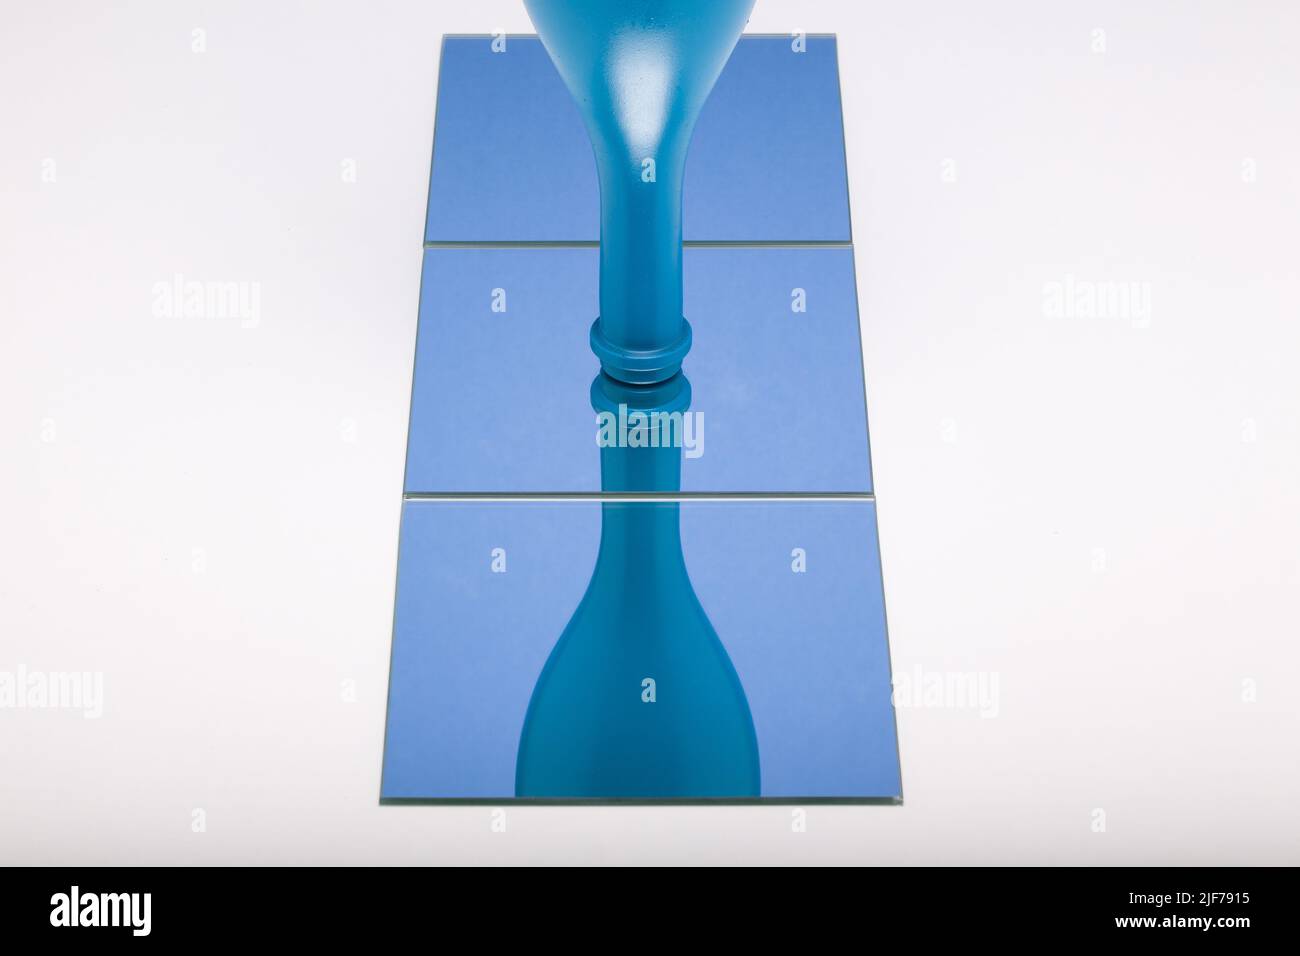 Horizontal image of mirror with reflection blue bottle in blue mirror. Concept of wine products. Stock Photo